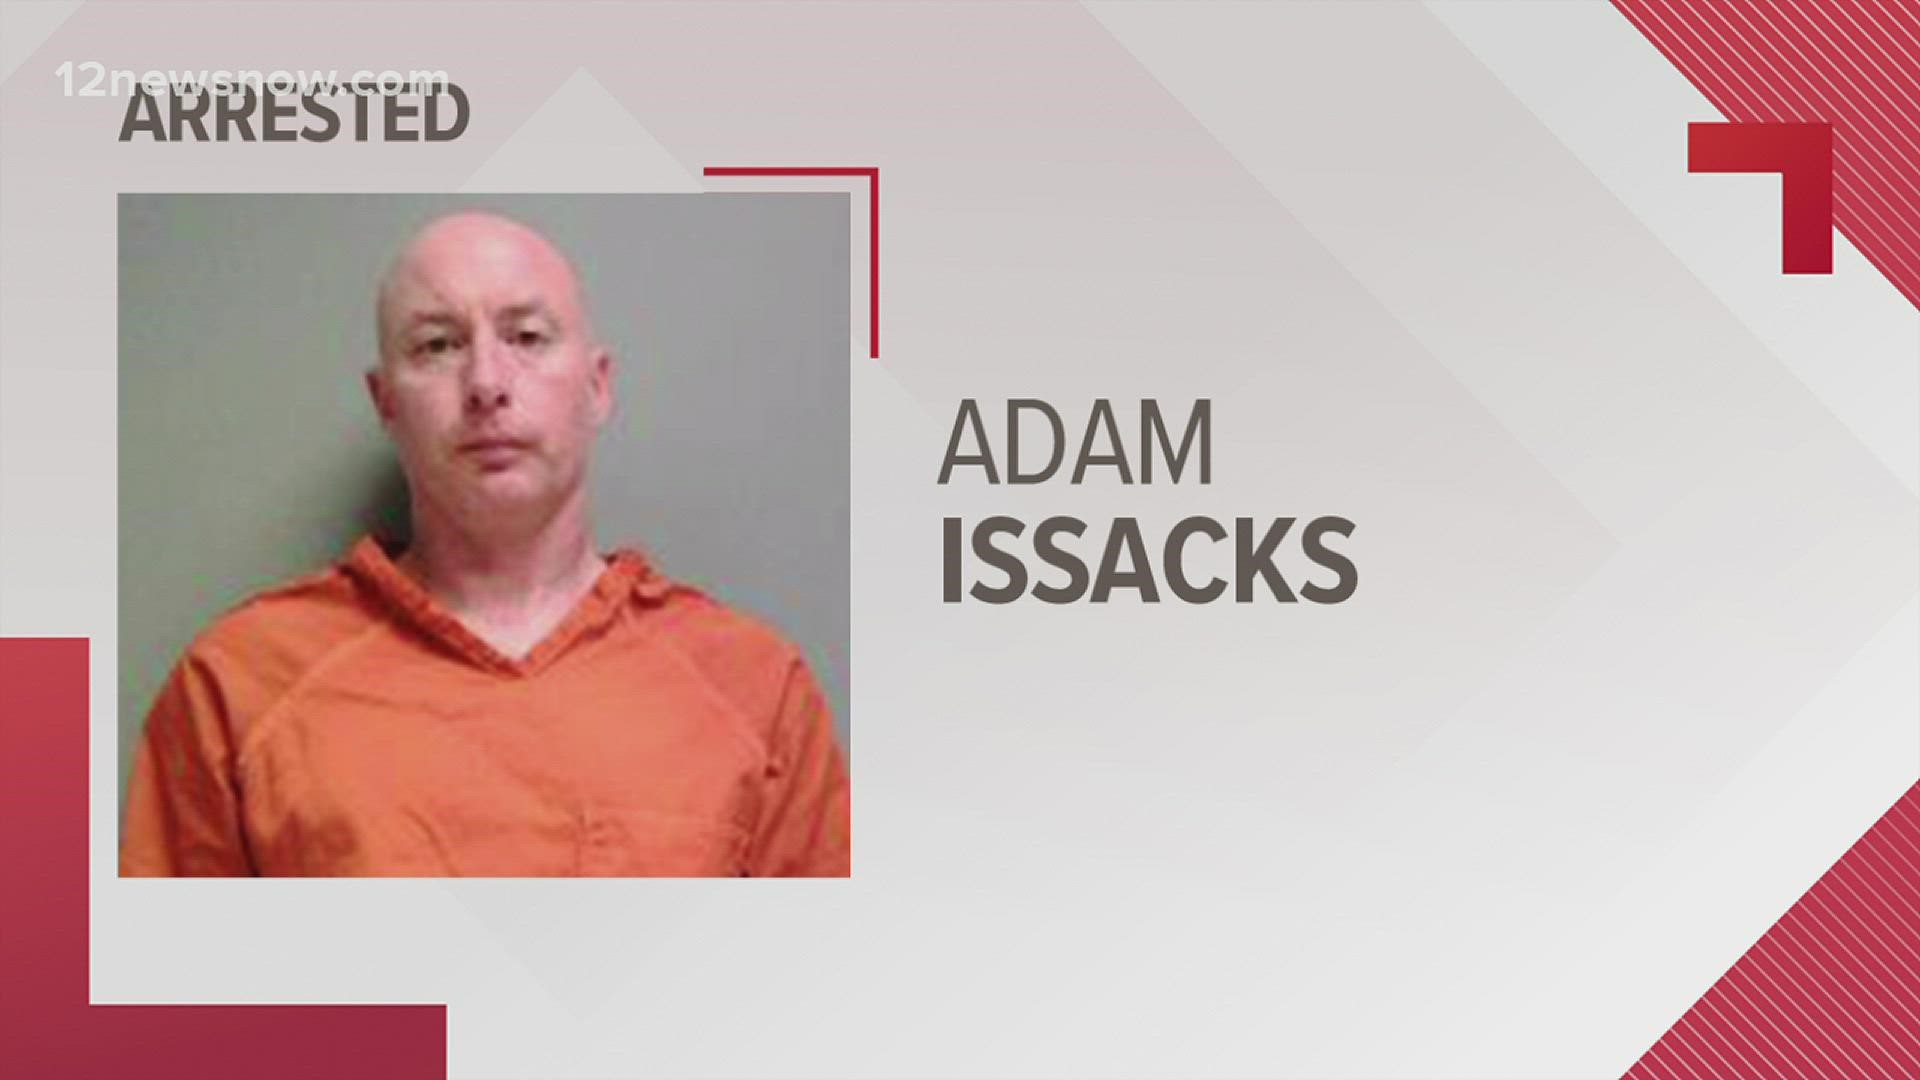 A Silsbee man had been arrested and charged with indecency with a child, according to Jasper County Chief Deputy Scotty Duncan.